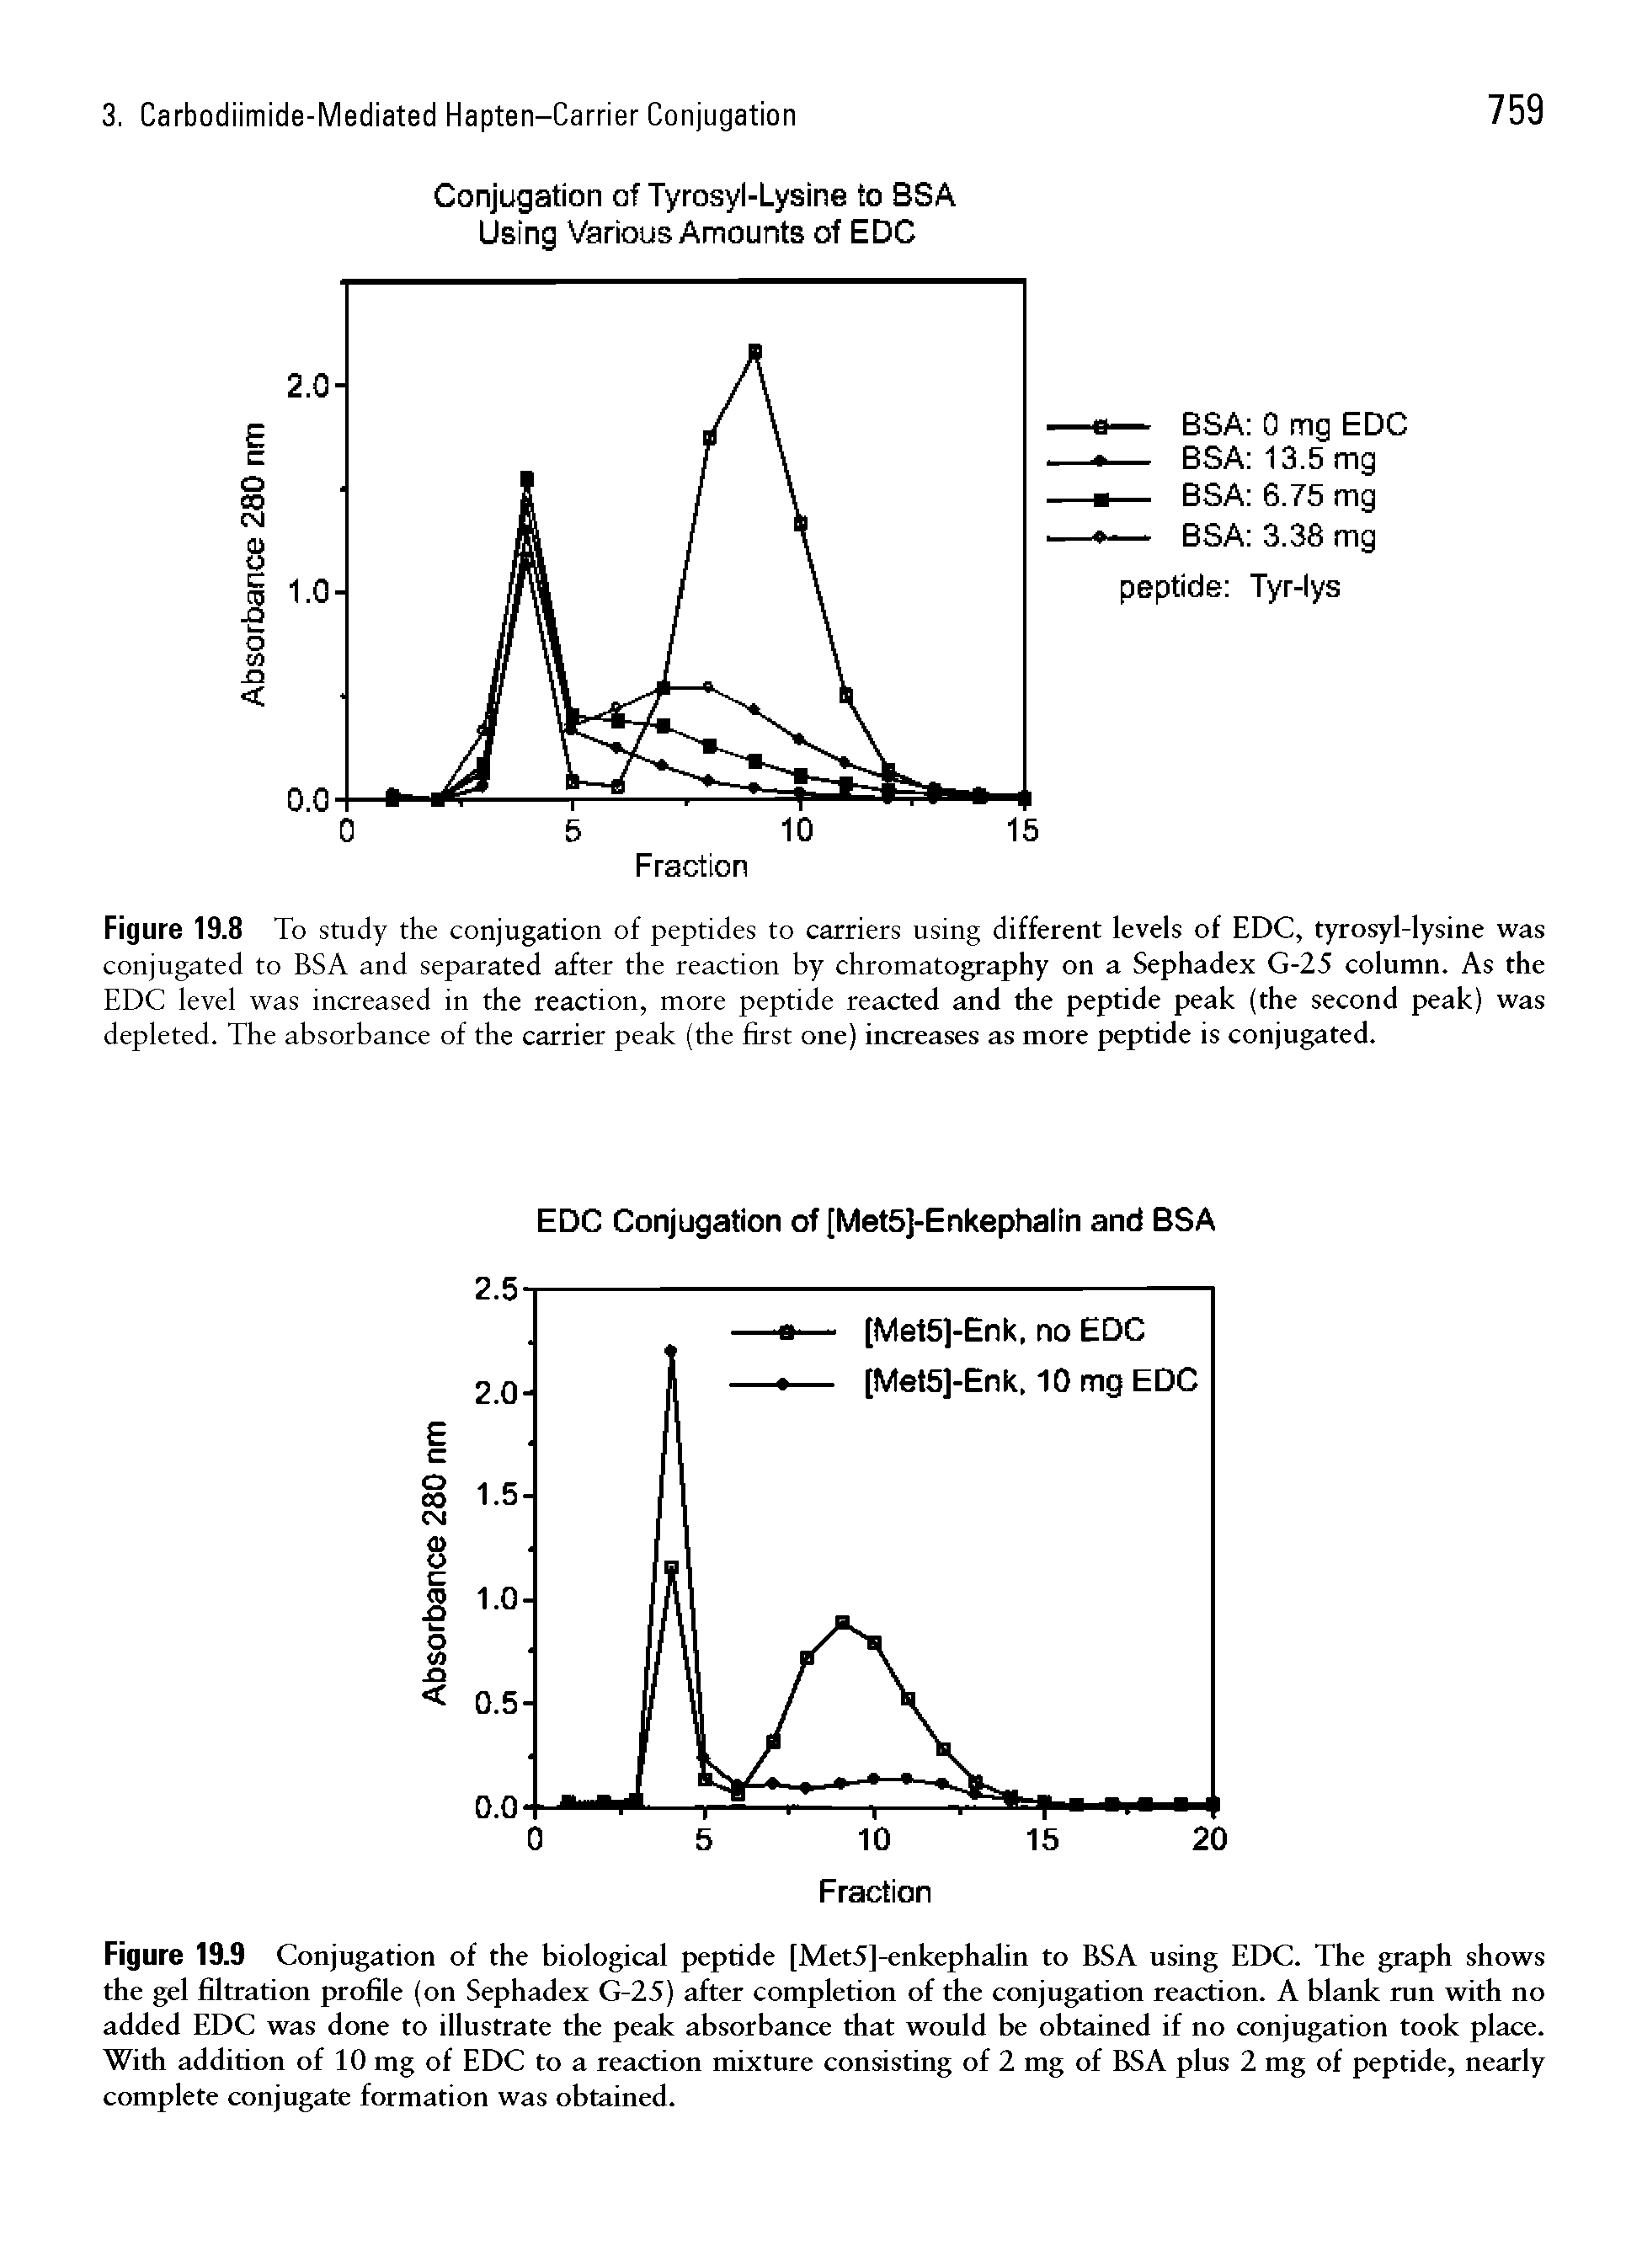 Figure 19.9 Conjugation of the biological peptide [Met5]-enkephalin to BSA using EDC. The graph shows the gel filtration profile (on Sephadex G-25) after completion of the conjugation reaction. A blank run with no added EDC was done to illustrate the peak absorbance that would be obtained if no conjugation took place. With addition of 10 mg of EDC to a reaction mixture consisting of 2 mg of BSA plus 2 mg of peptide, nearly complete conjugate formation was obtained.